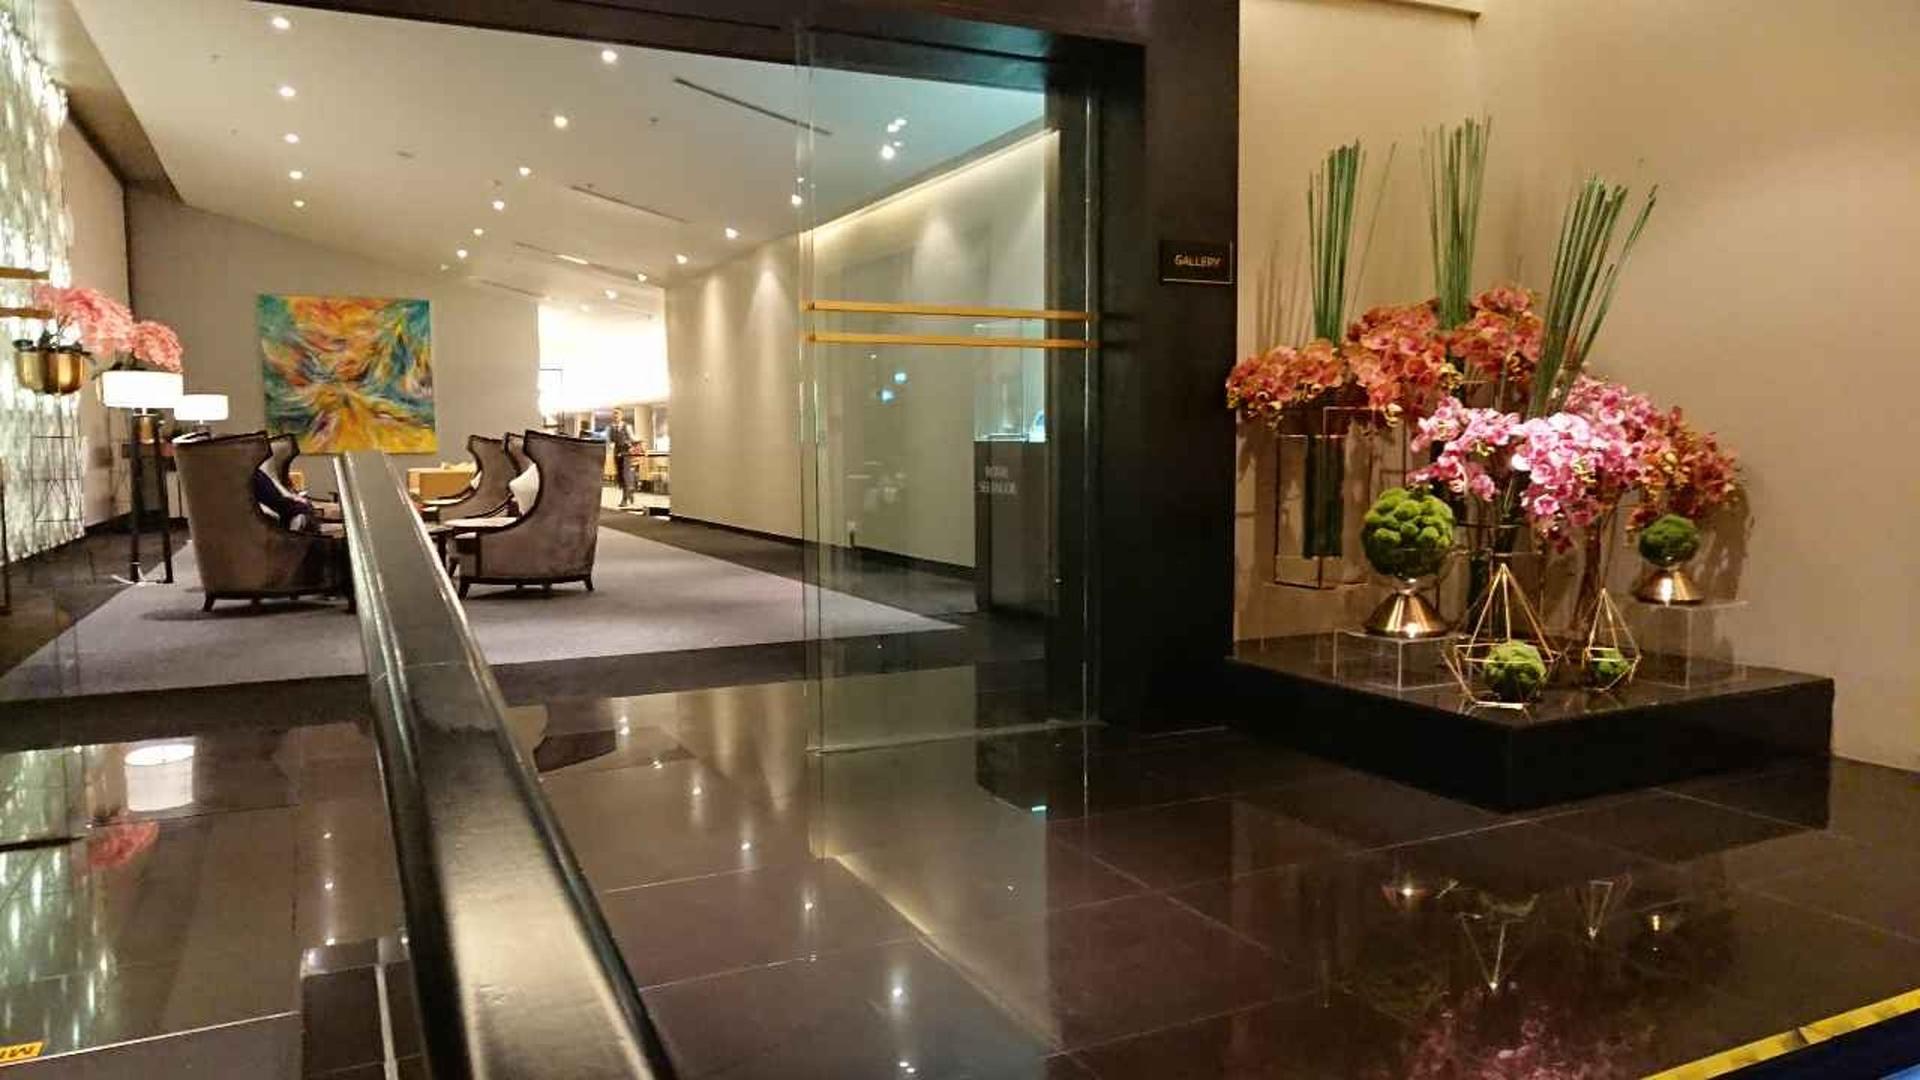 Malaysia Airlines Platinum Lounge image 17 of 26